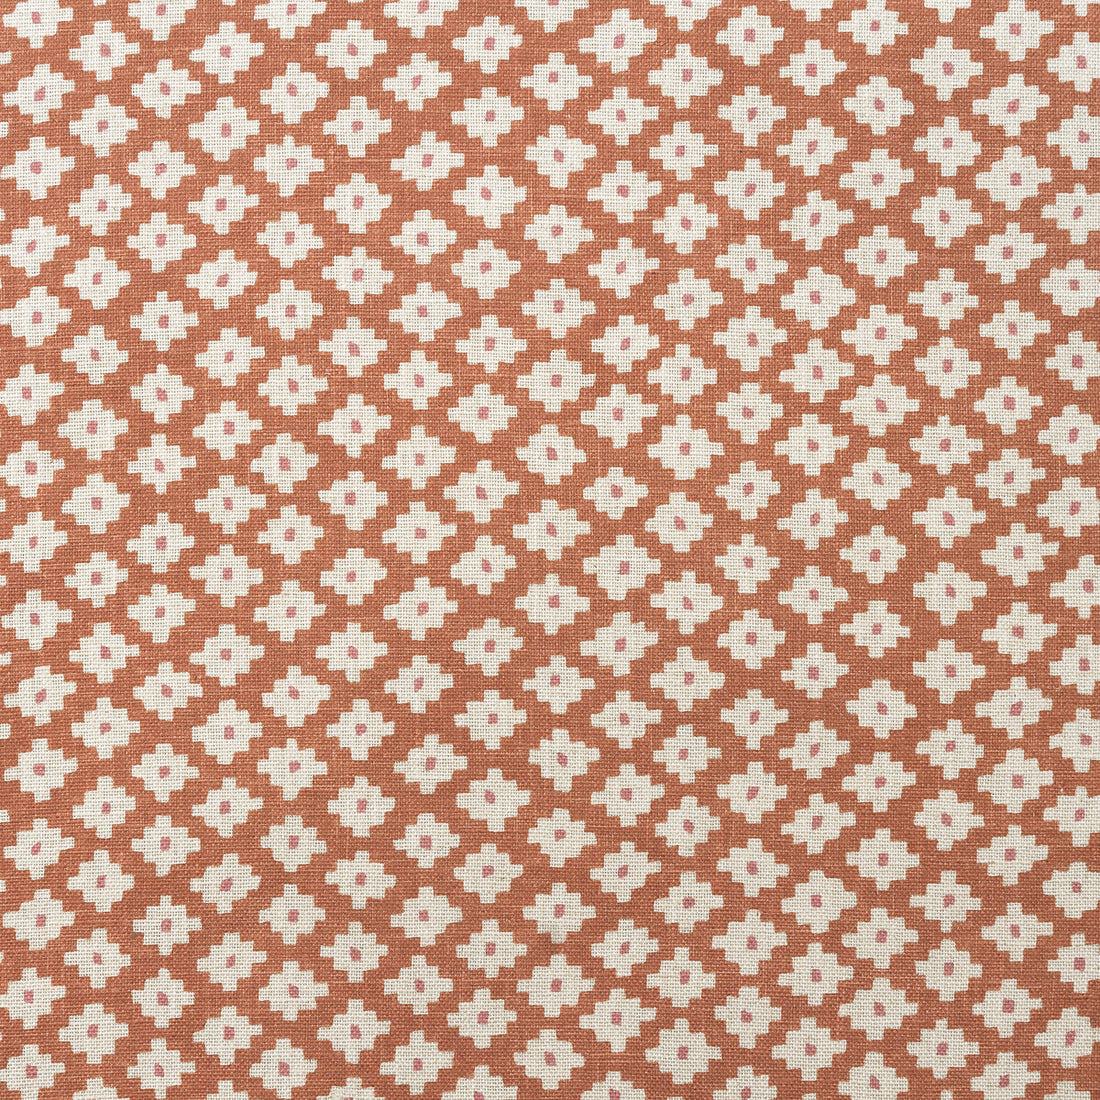 Maze fabric in orange color - pattern AM100381.12.0 - by Kravet Couture in the Andrew Martin Garden Path collection